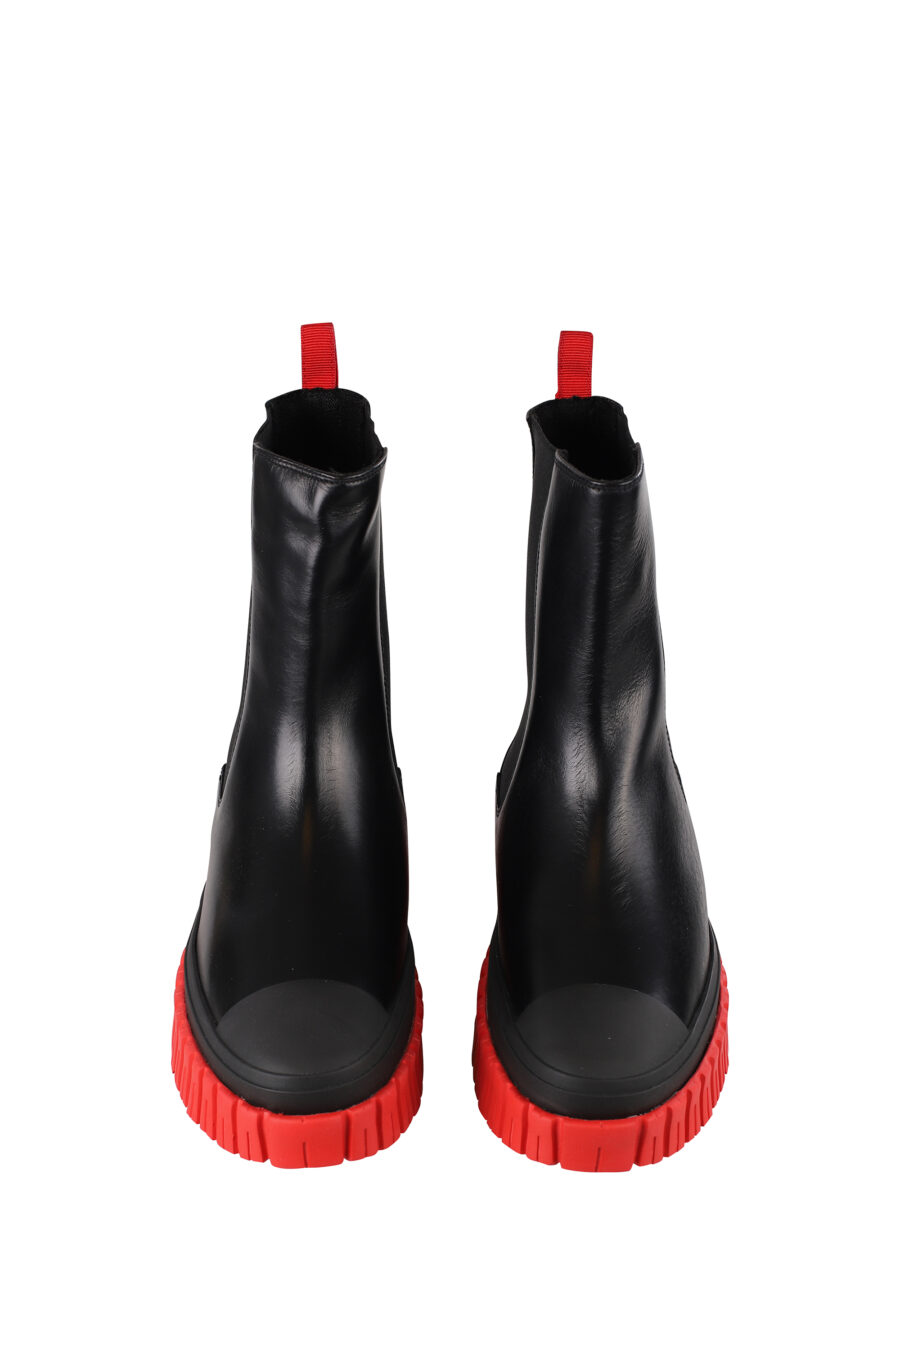 Black ankle boots with red sole and white mini-logo - IMG 1223